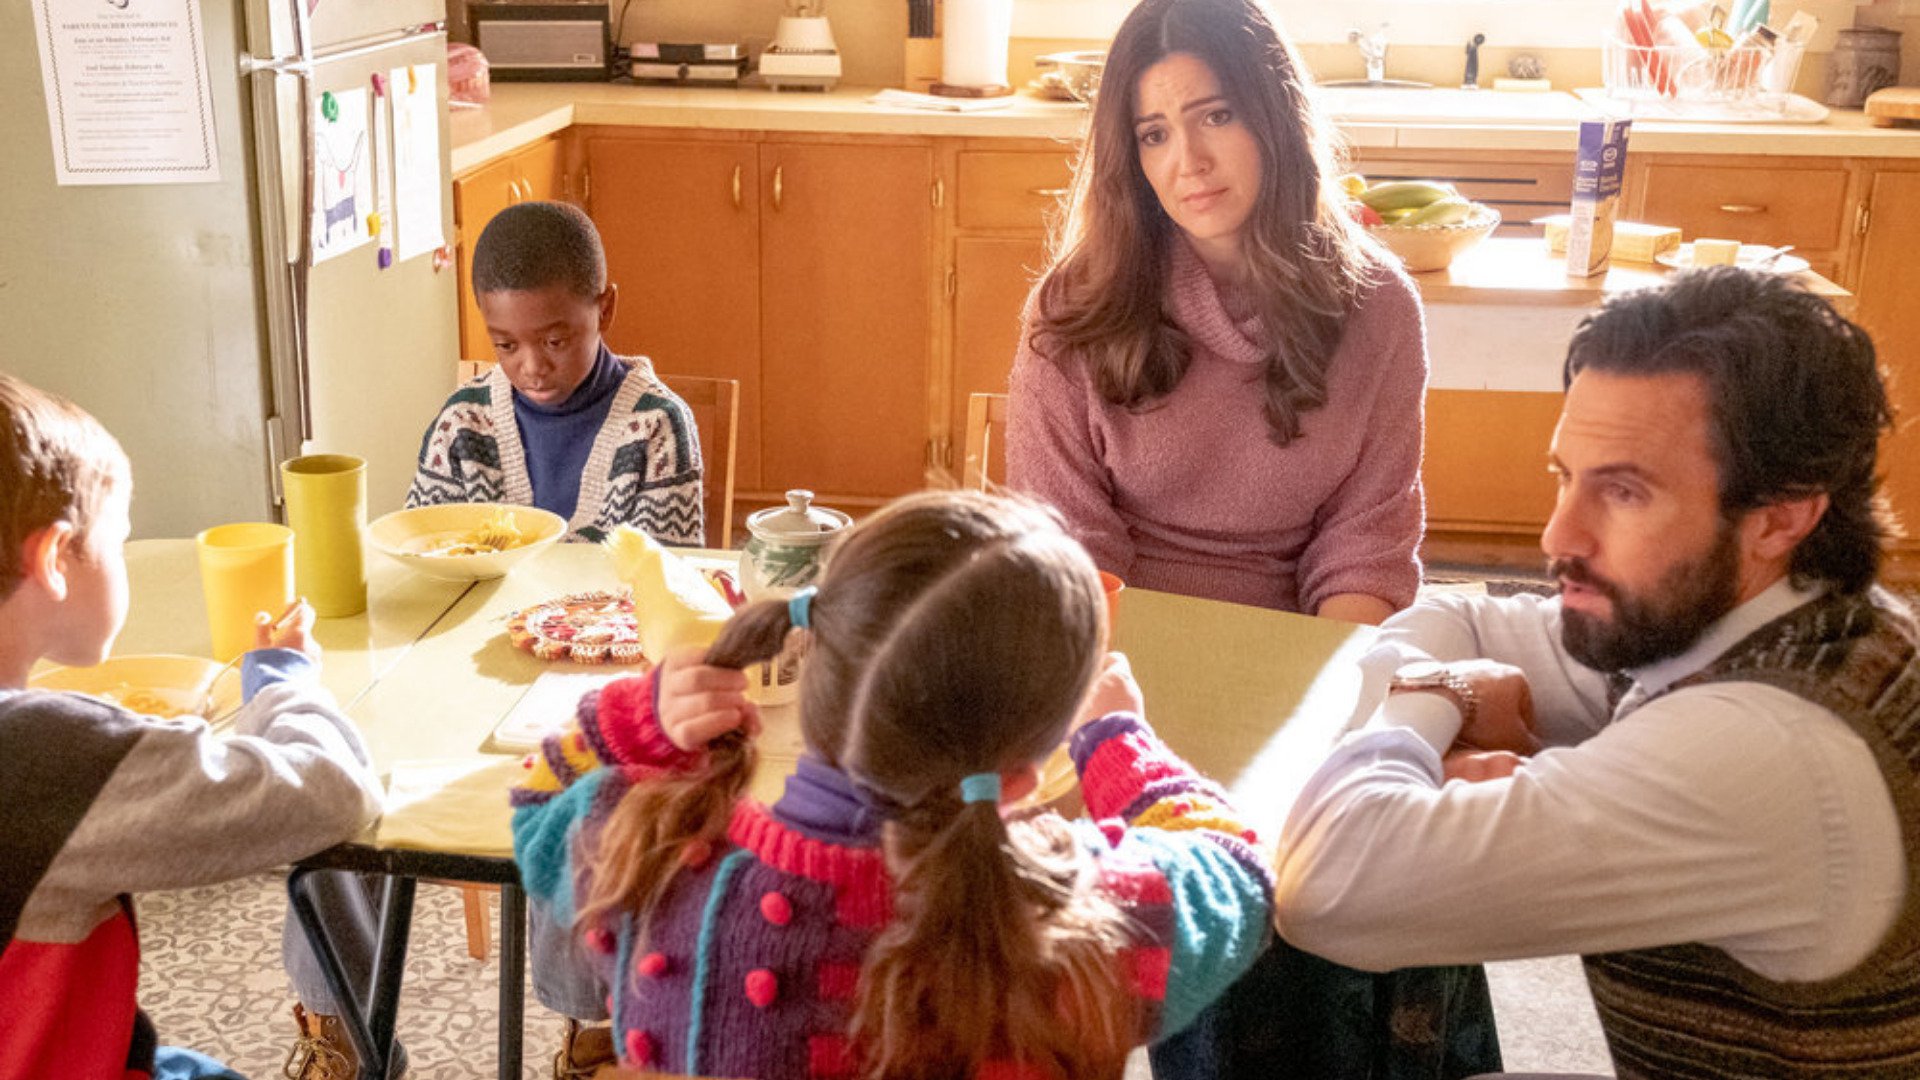 ‘This Is Us’ Recap for Season 6 Episode 1, ‘The Challenger’: What’s New With the Pearsons in the Premiere?